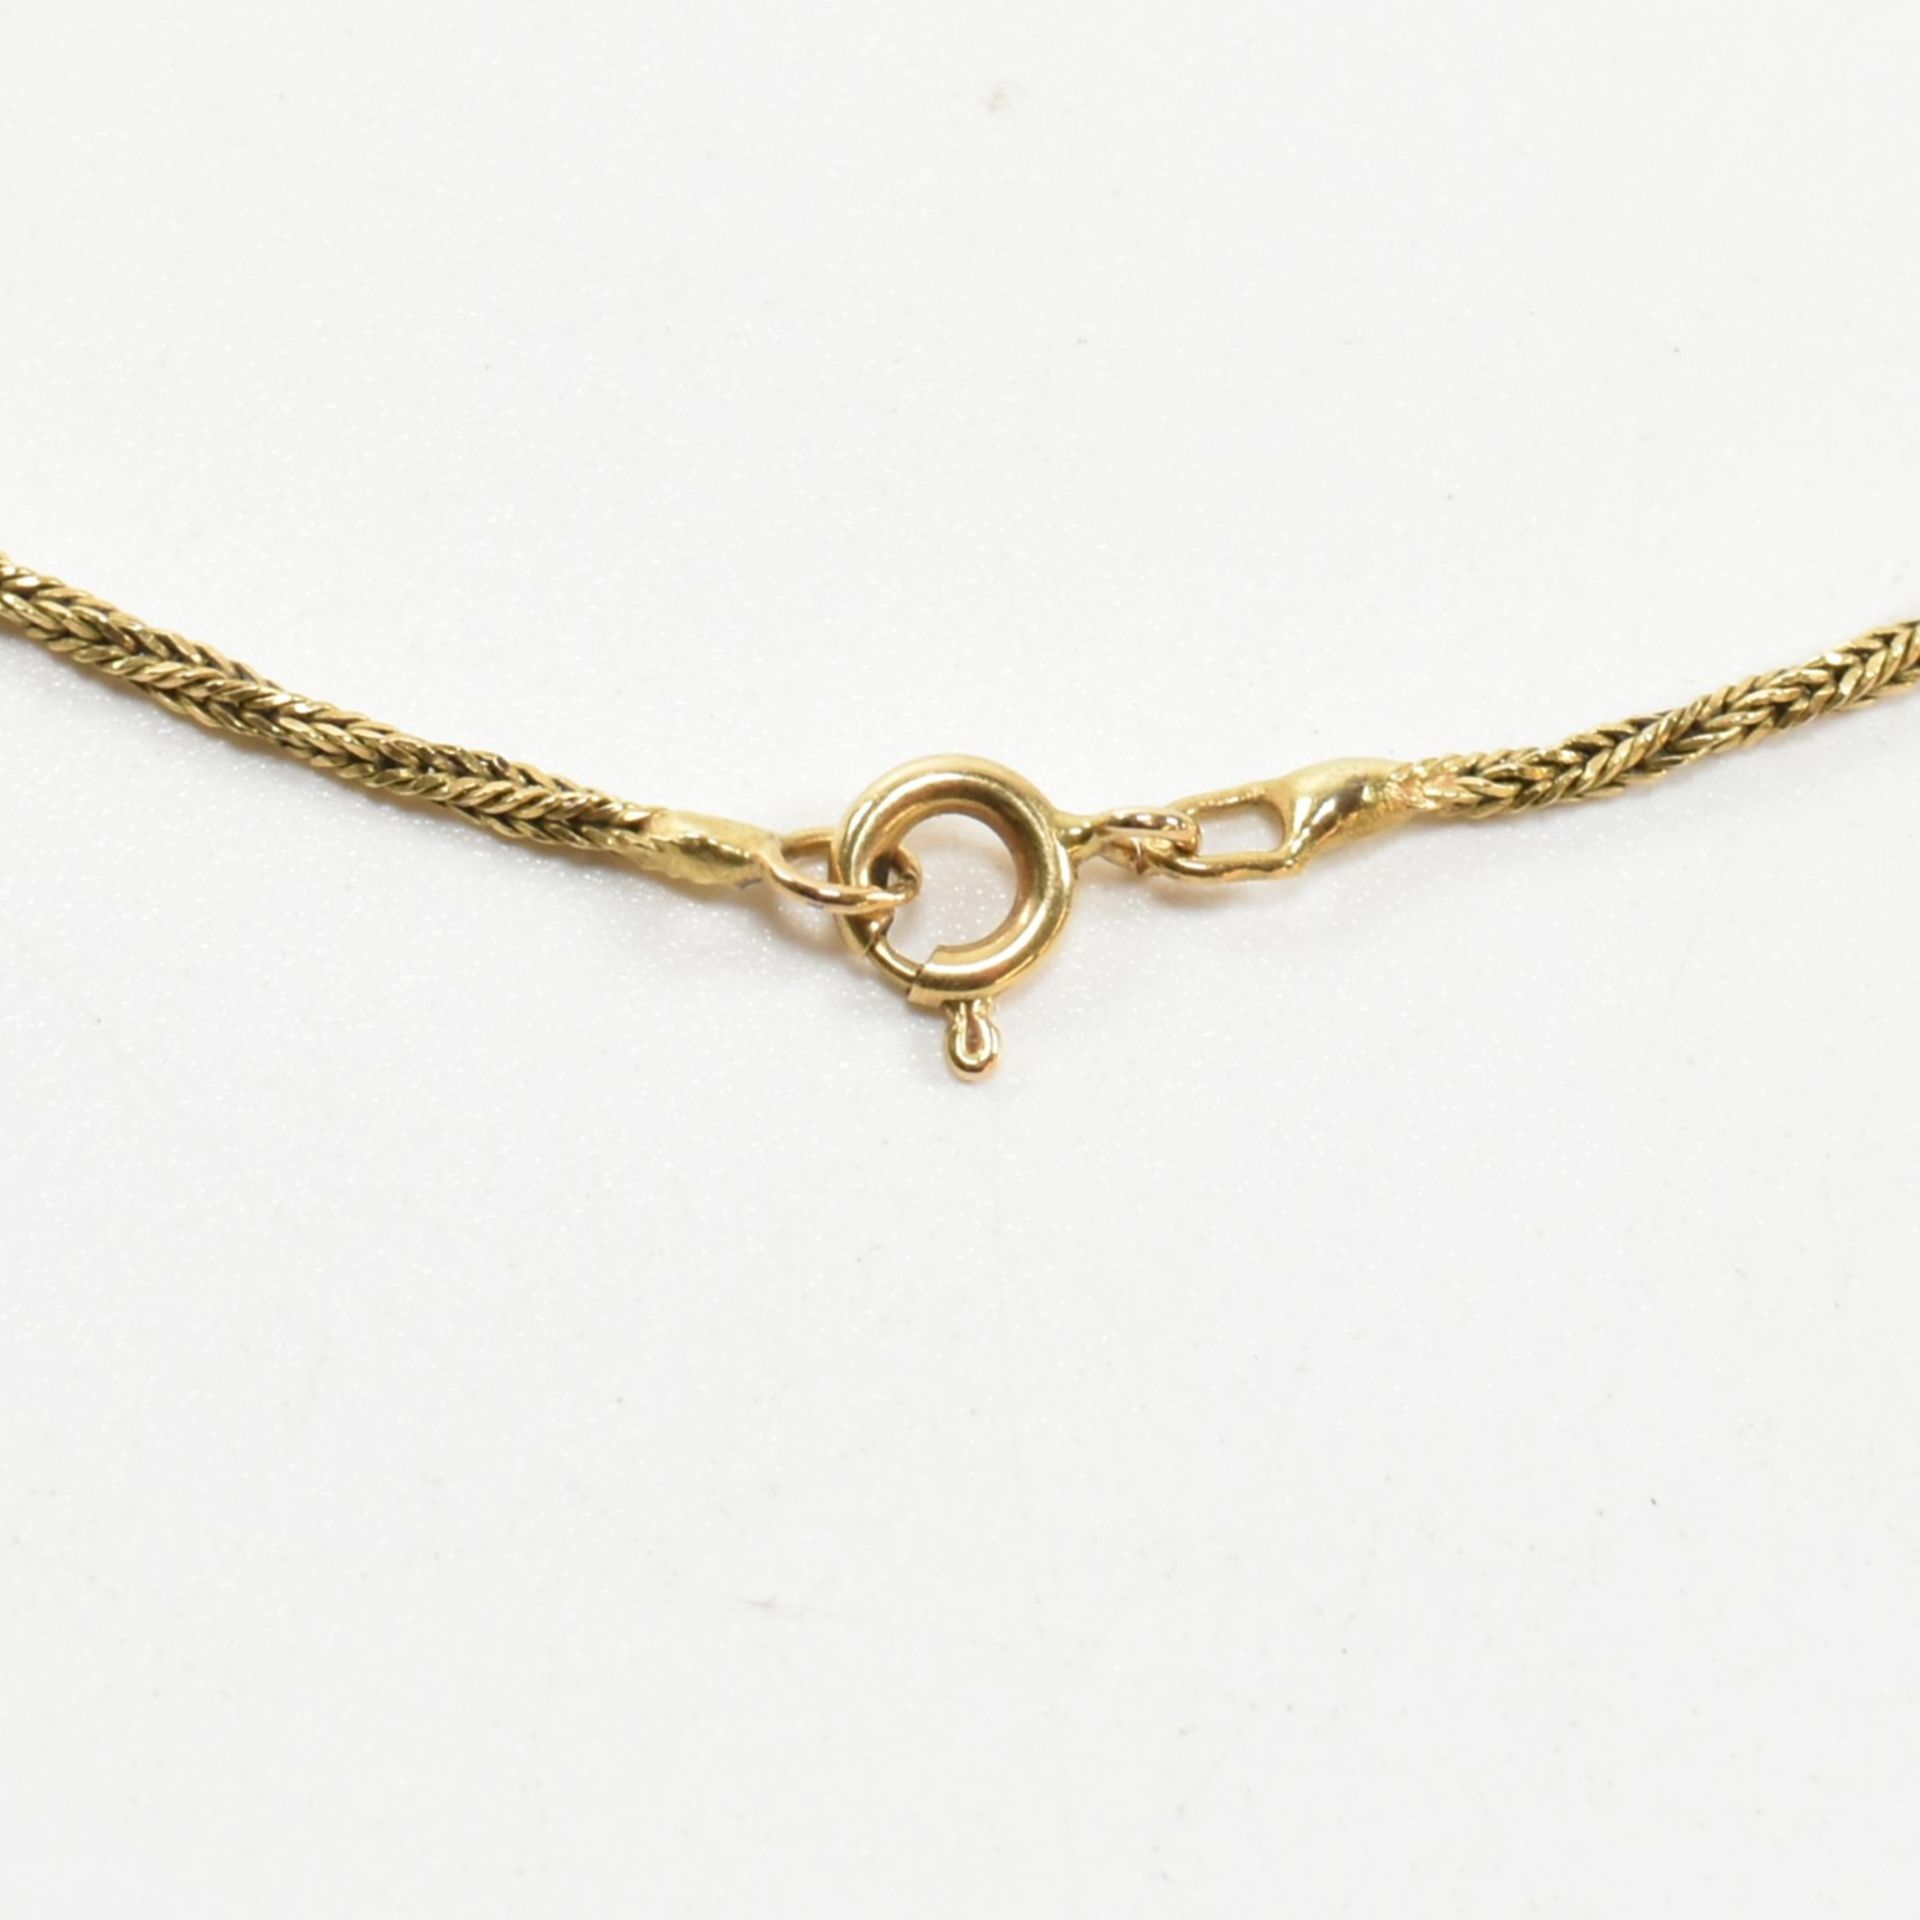 18CT GOLD TWISTED CHAIN NECKLACE - Image 3 of 4